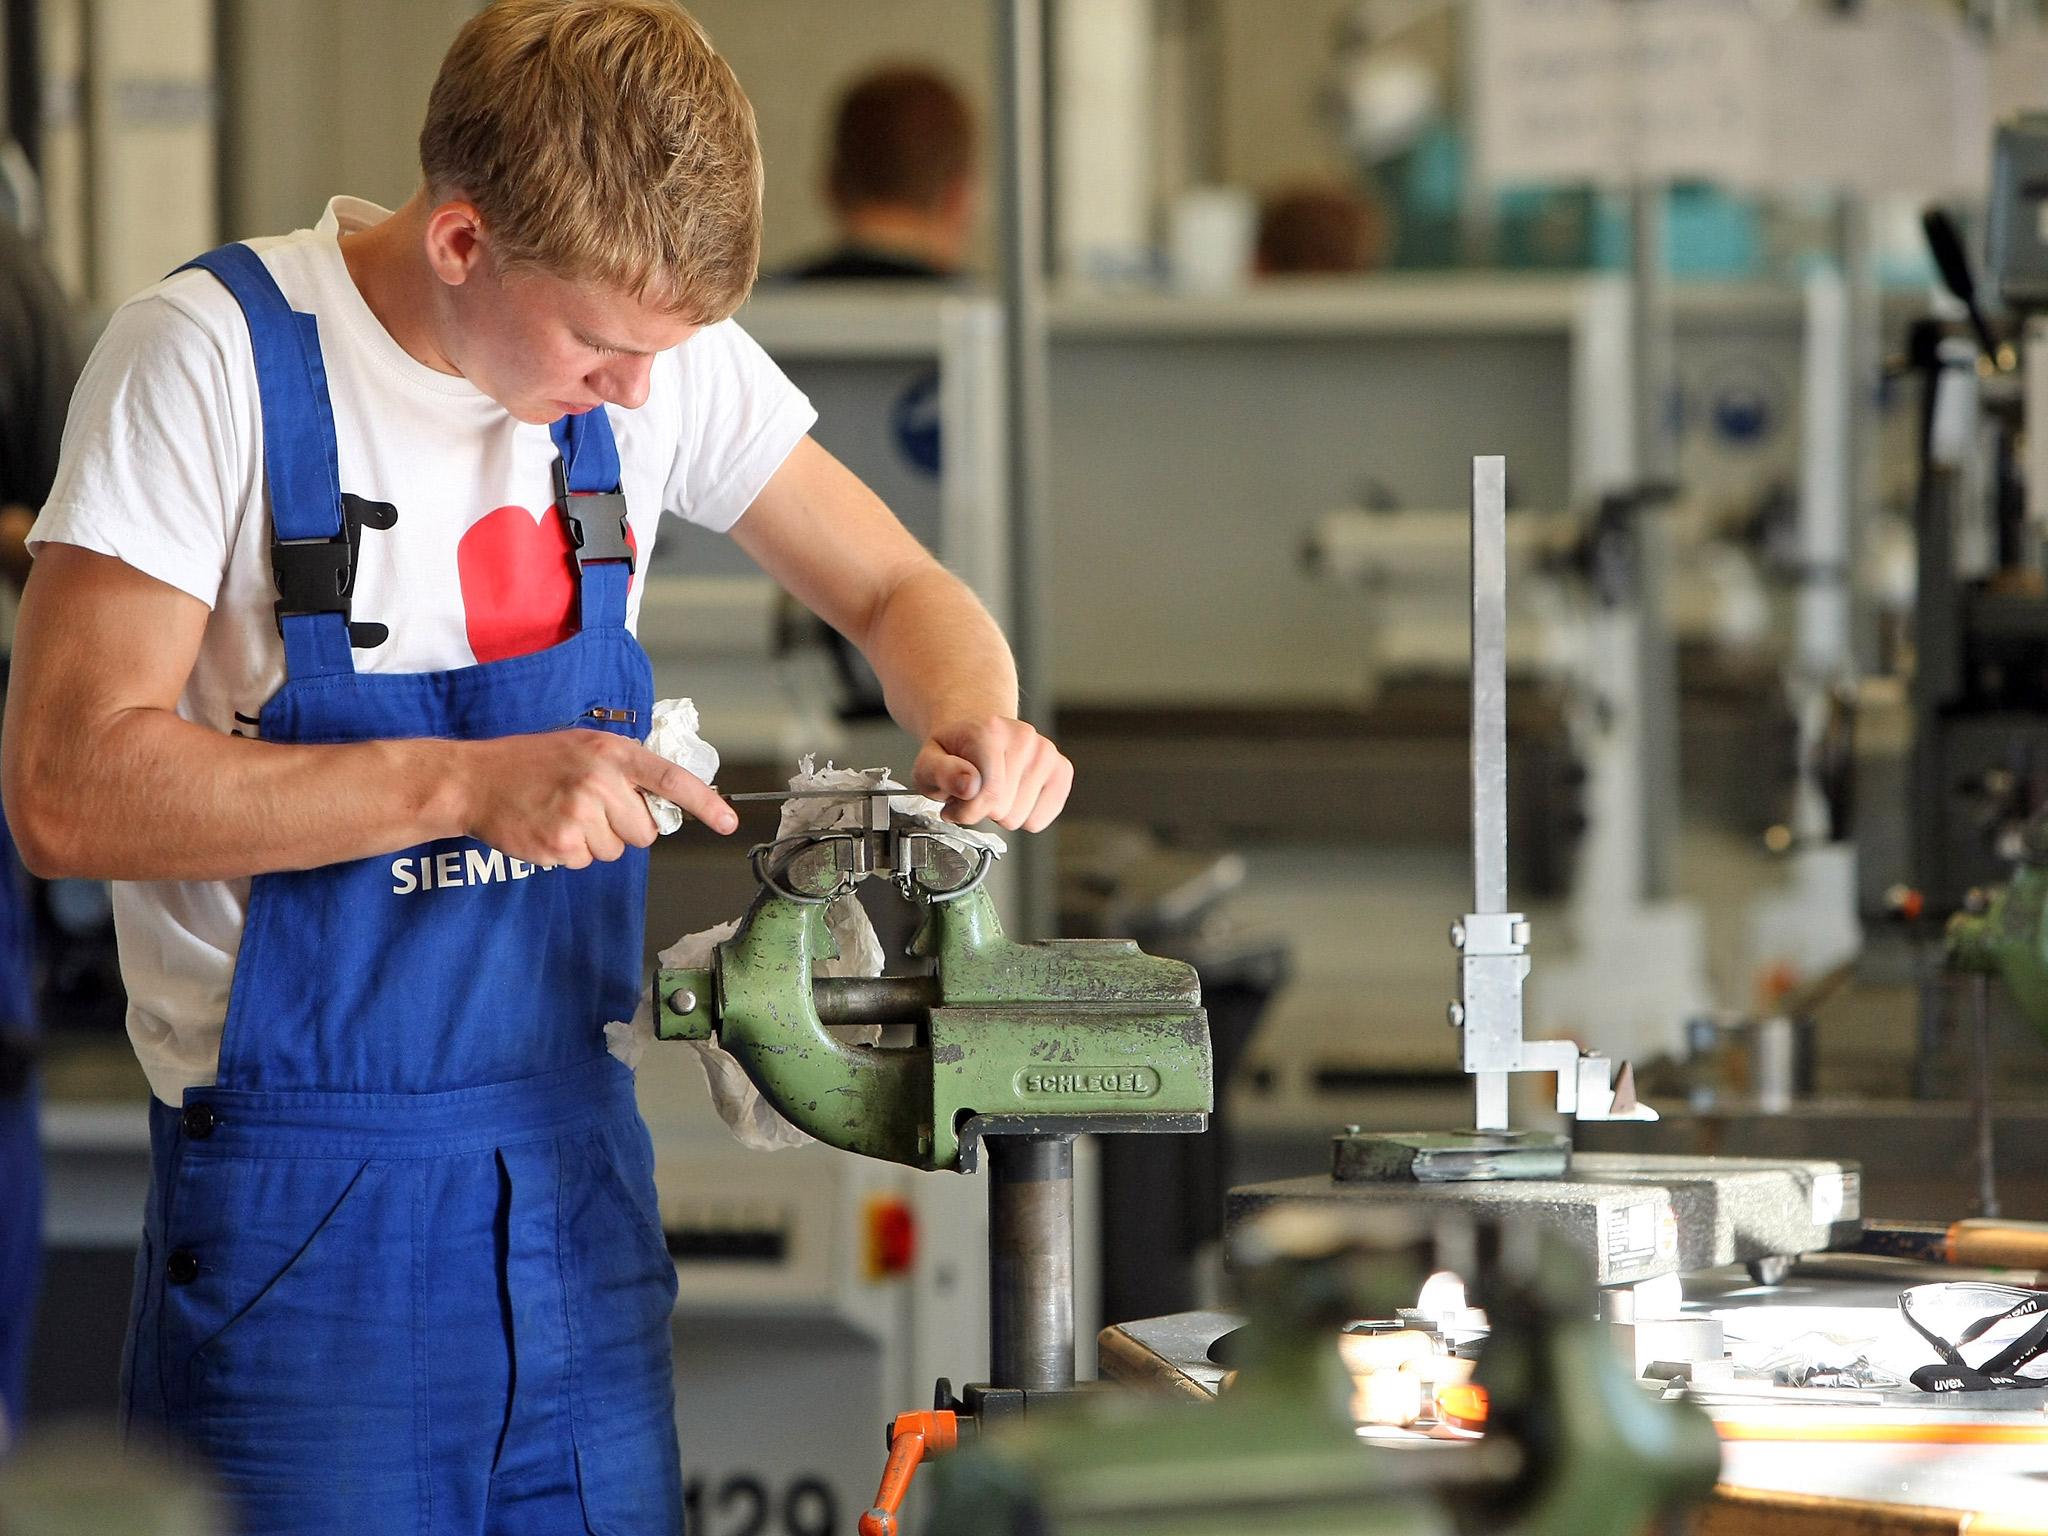 The Government wants to create three million apprenticeships in England by 2020